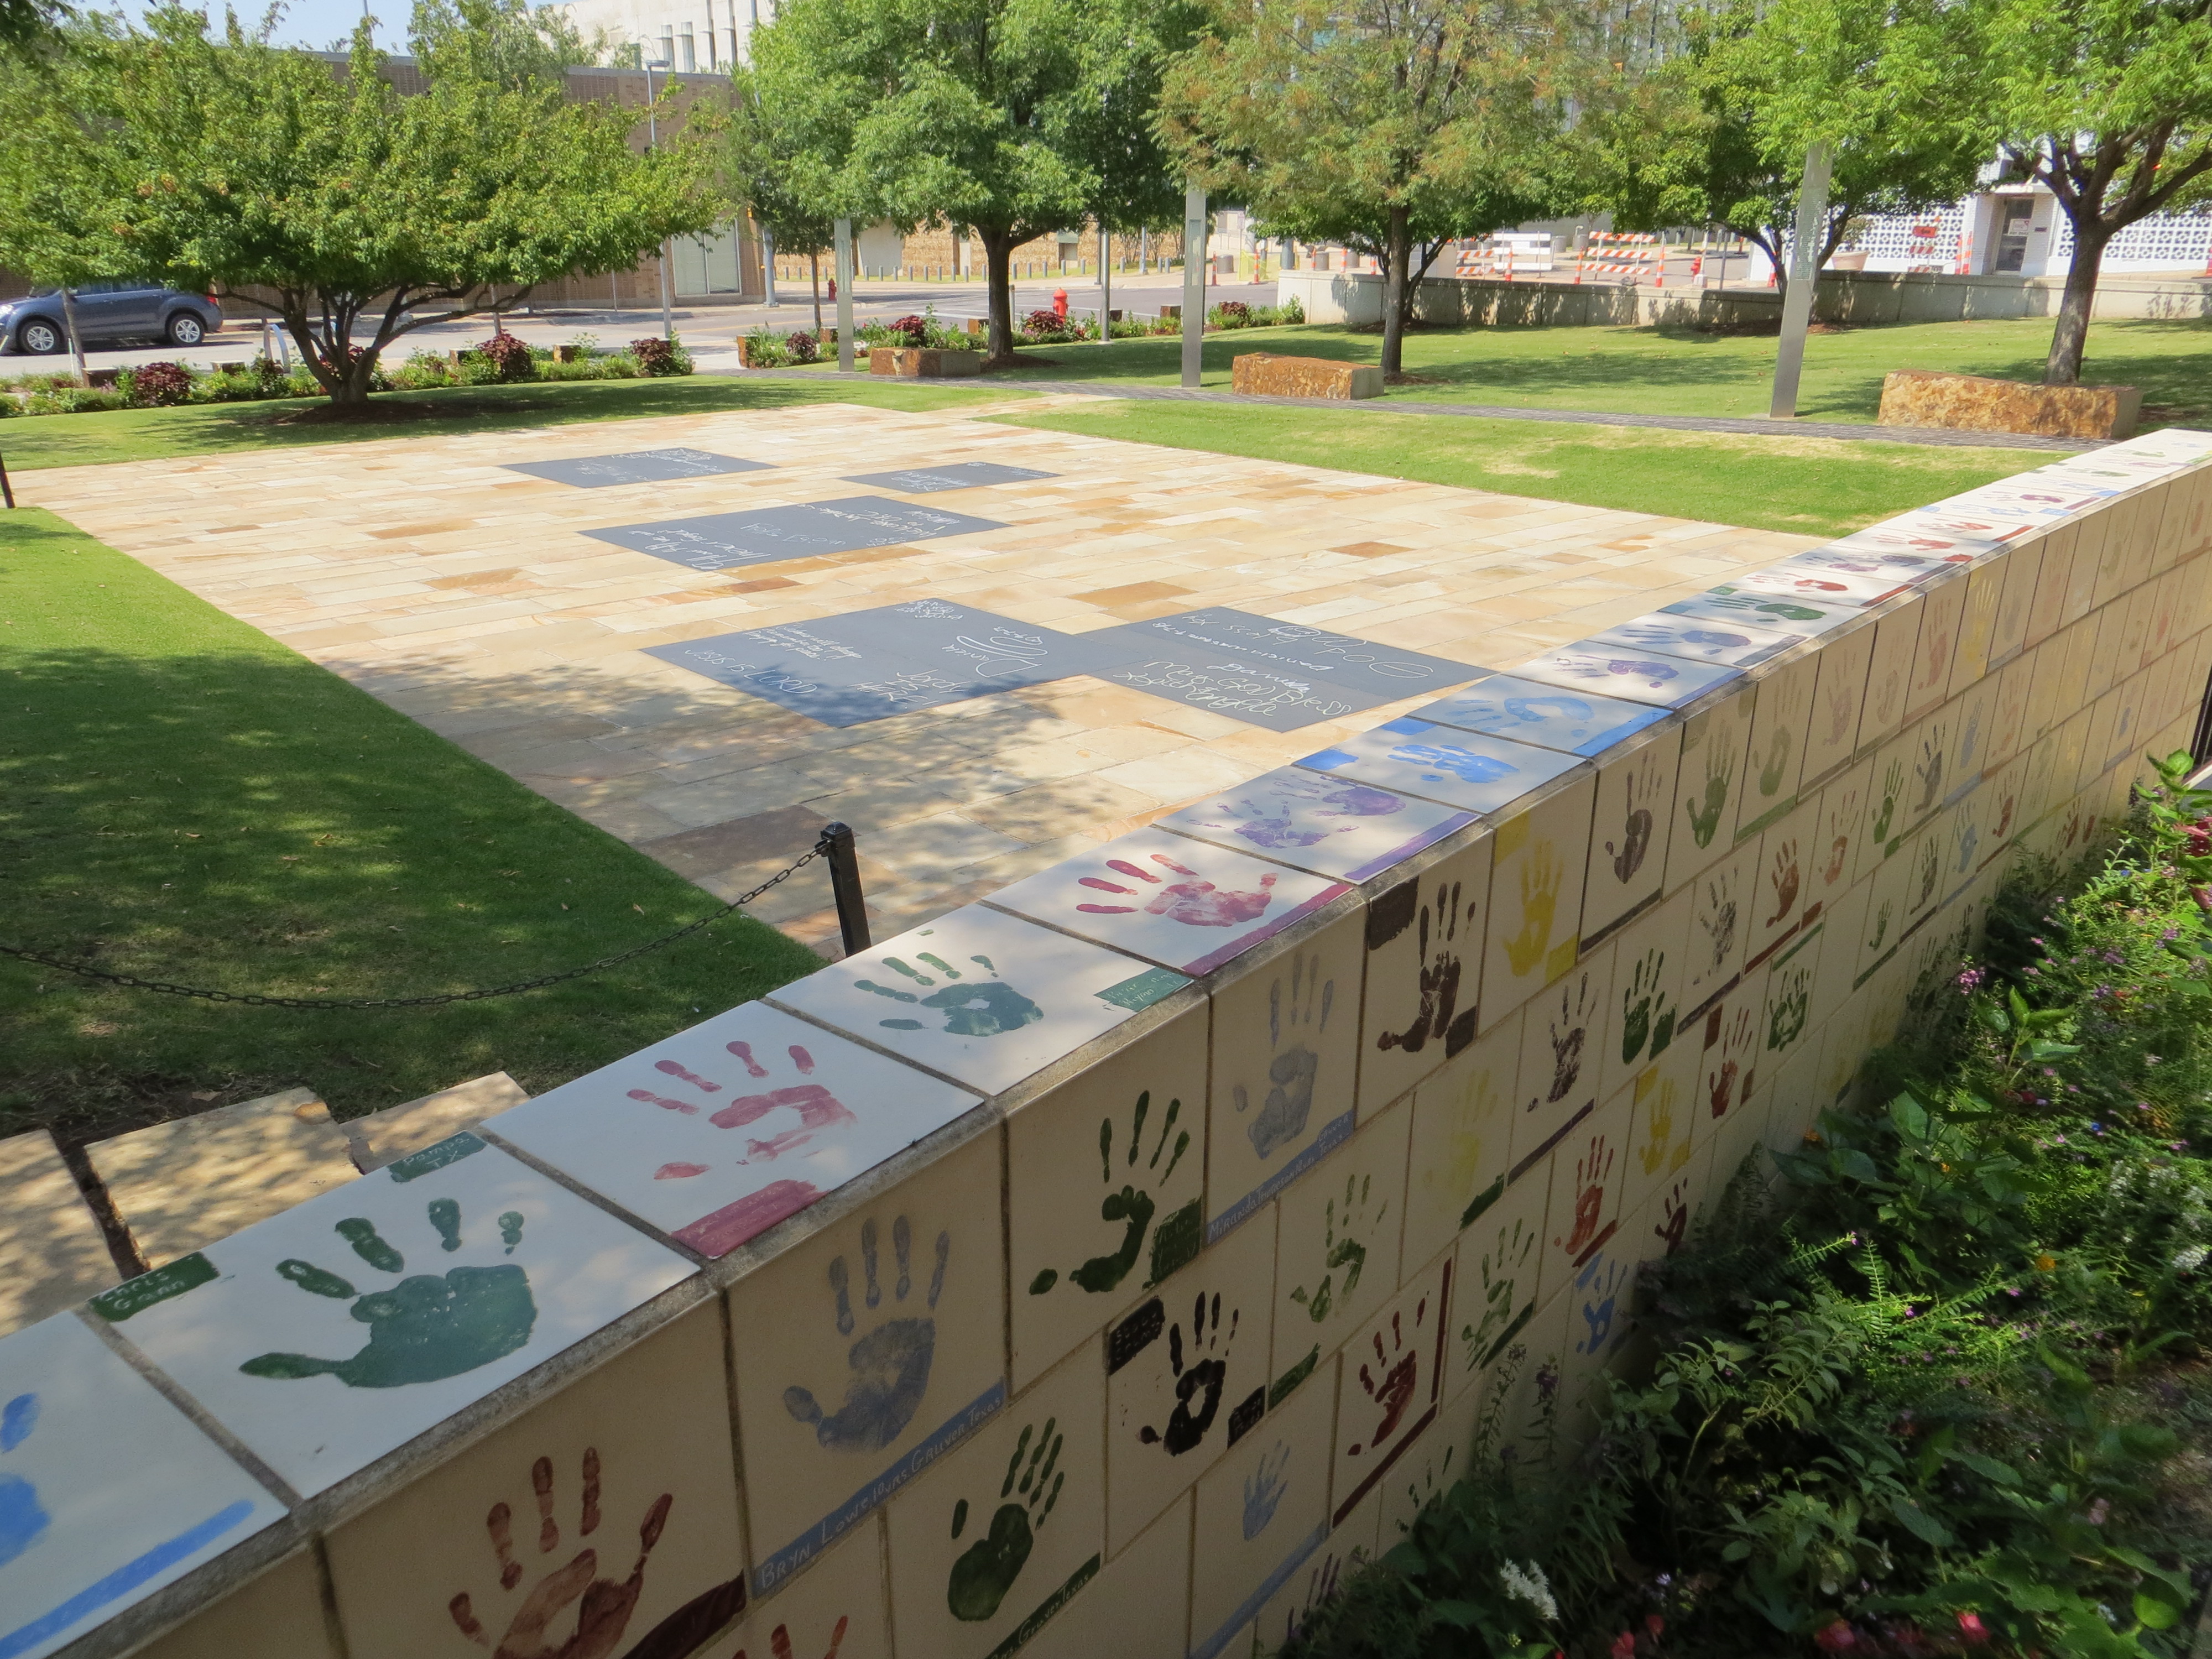 Tiles with hand prints and chalkboards set into the ground for children.